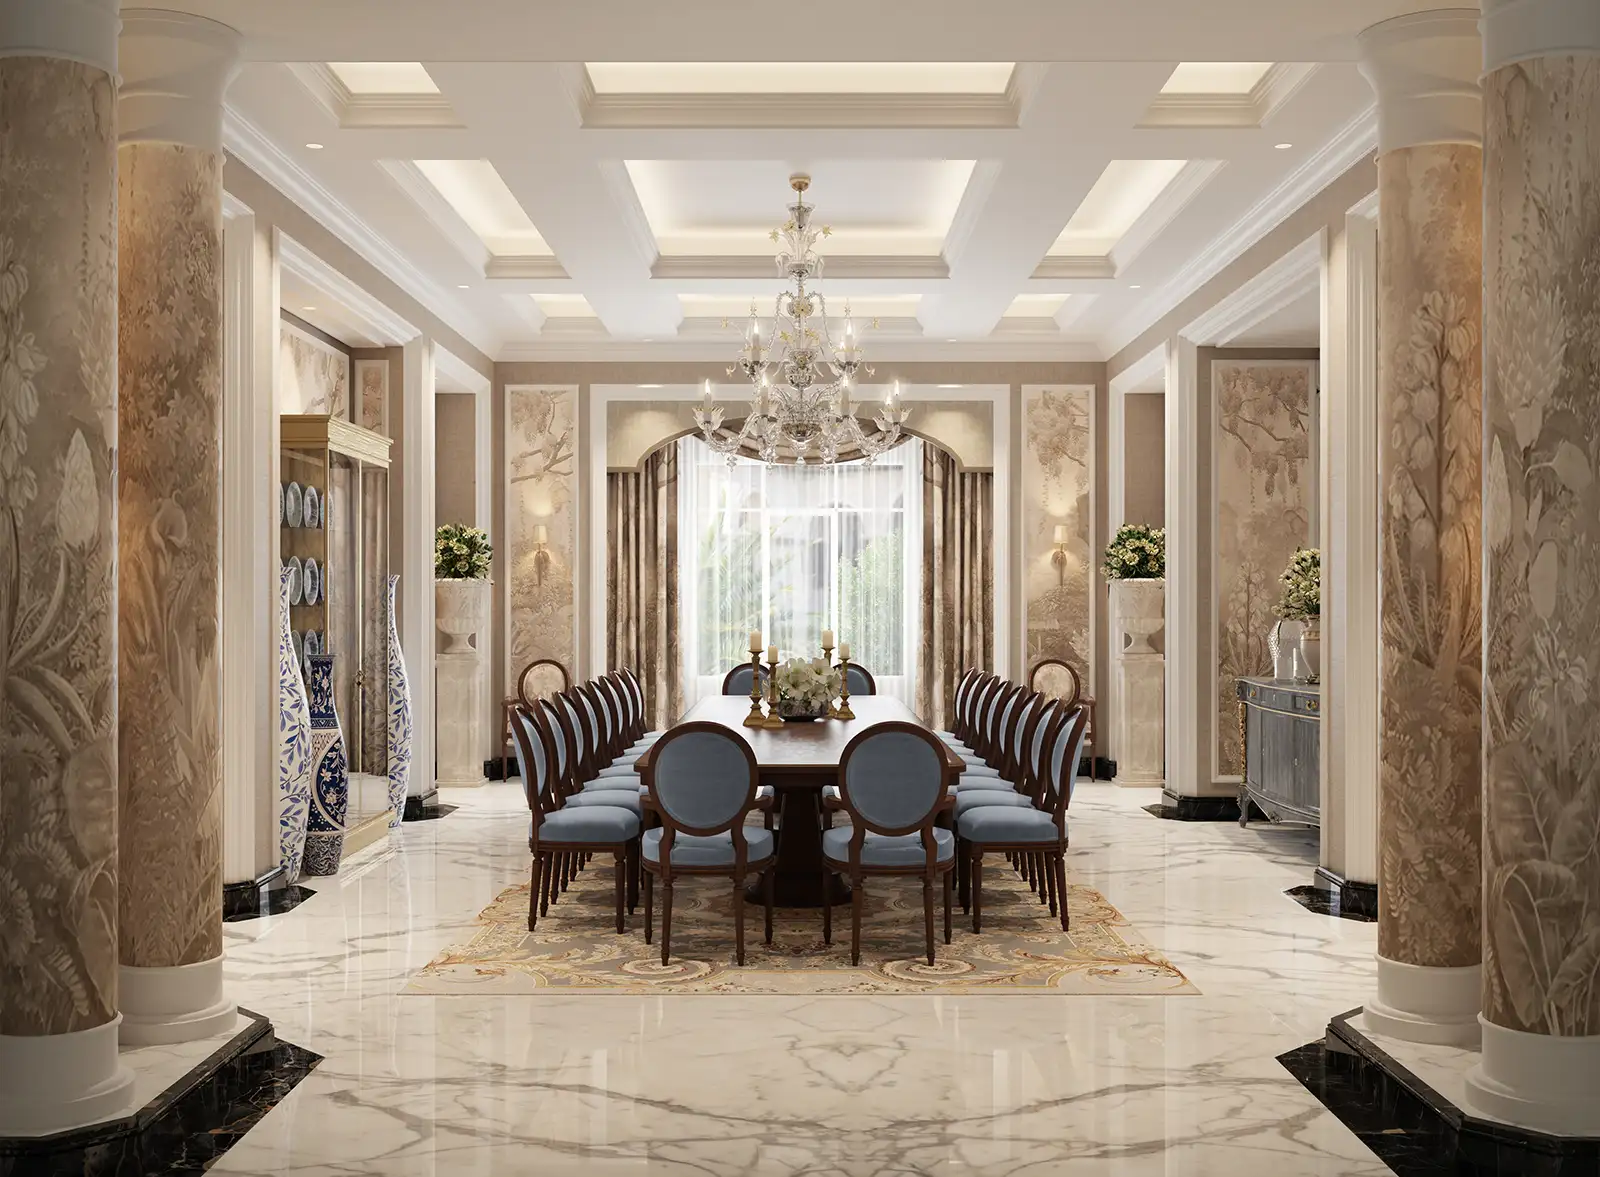 Opulent dining room interior design featuring a grand table set with high-back chairs, sophisticated marble flooring, elaborate columns, and a majestic crystal chandelier, surrounded by elegant decorative elements